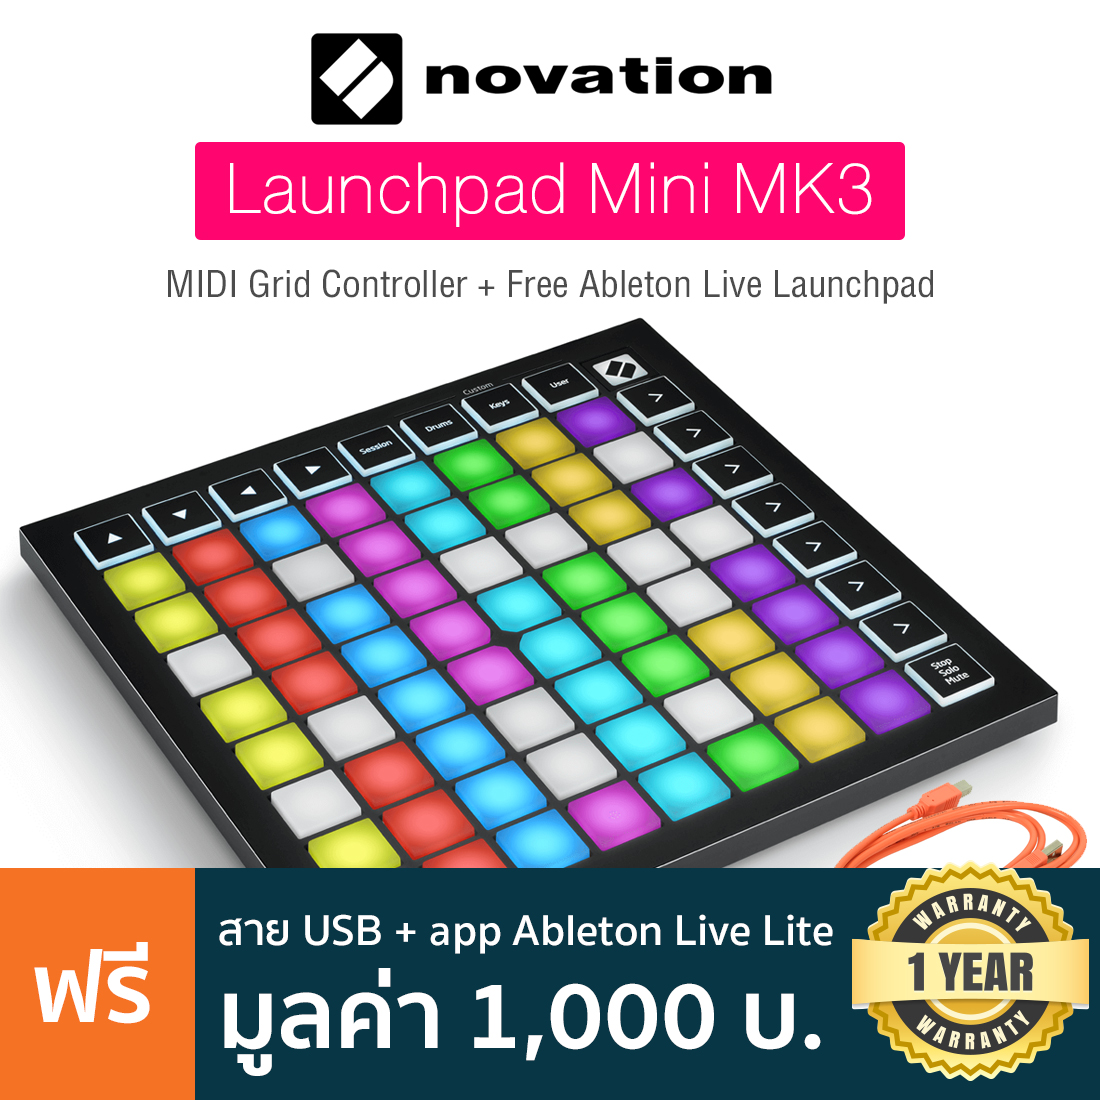 novation launchpad app for android